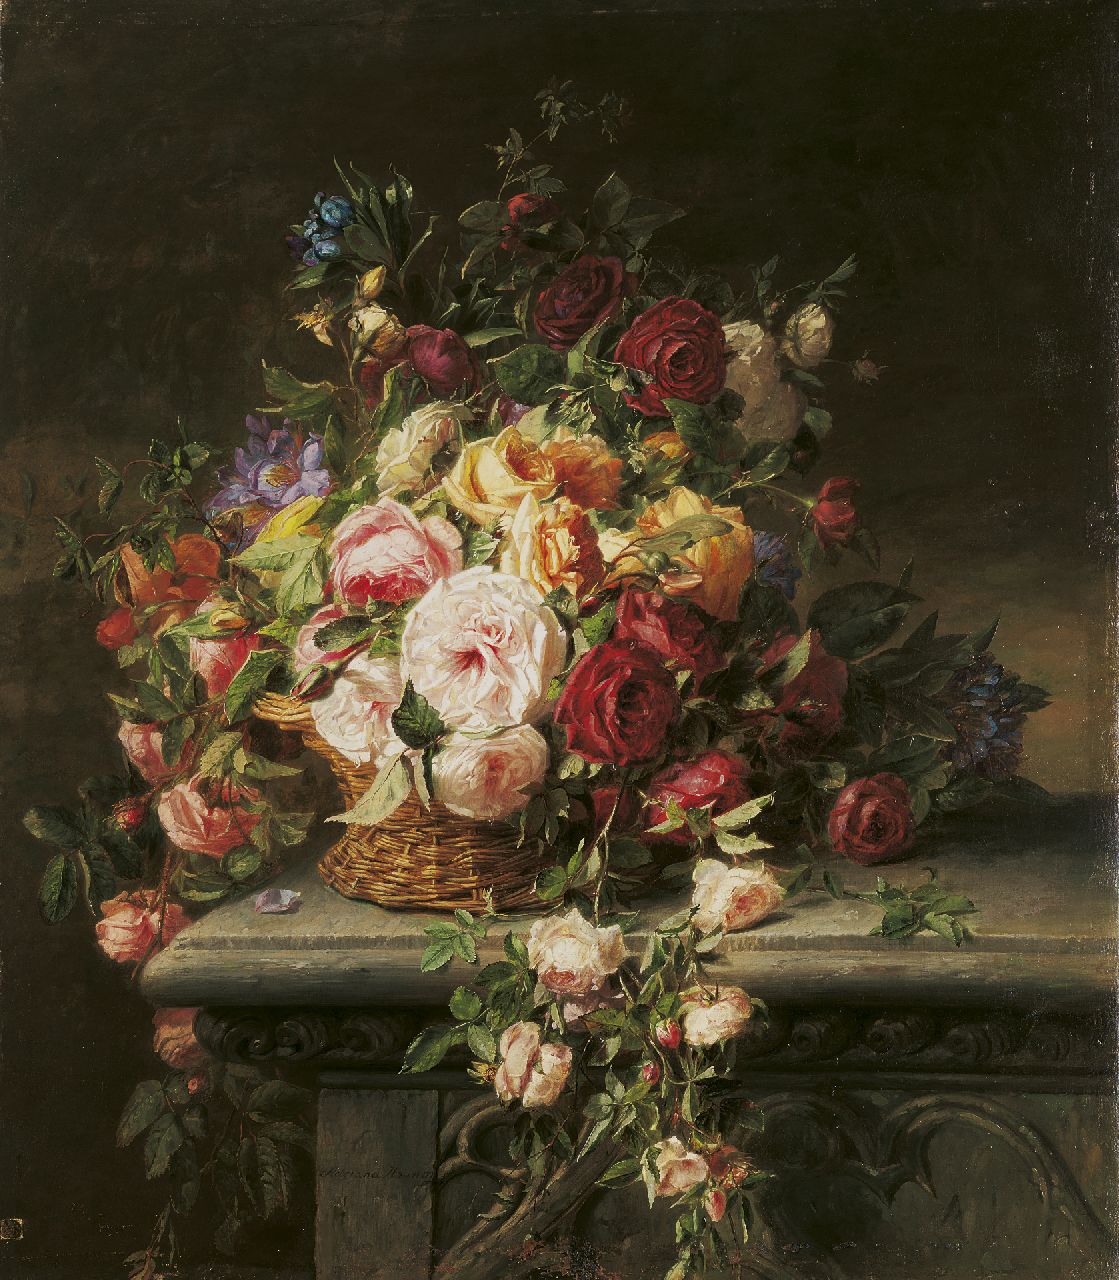 Haanen A.J.  | Adriana Johanna Haanen, Basket with roses on a garden bench, oil on canvas 101.5 x 88.0 cm, signed l.c.